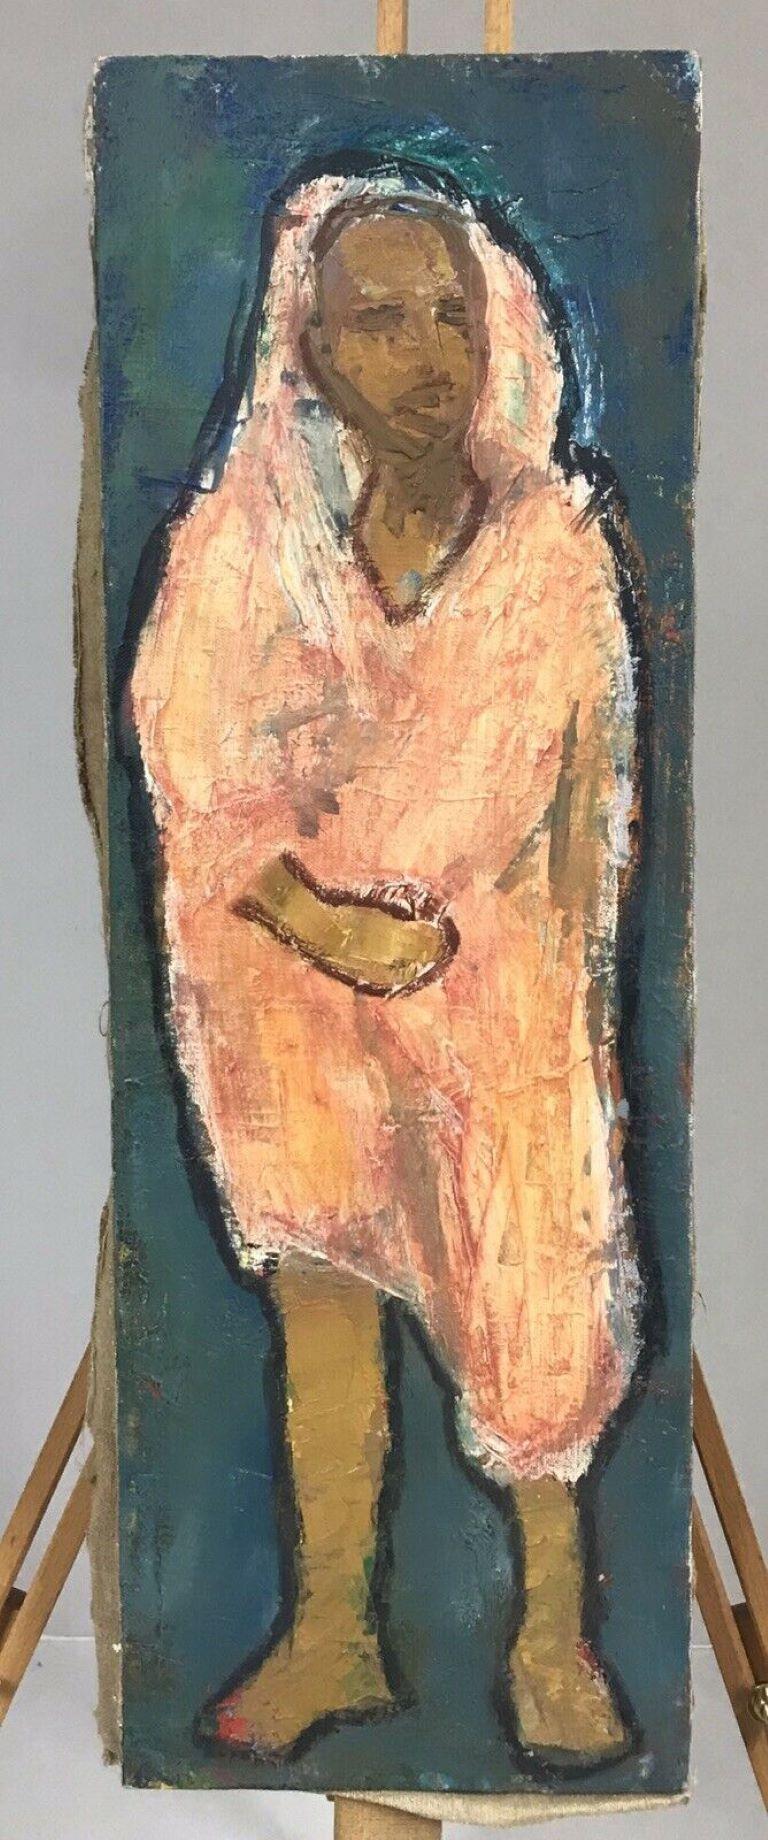 AKOS BIRO (1911-2002) LARGE EXPRESSIONIST OIL PAINTING ON CANVAS - FIGURE  - Painting by Akos Biro